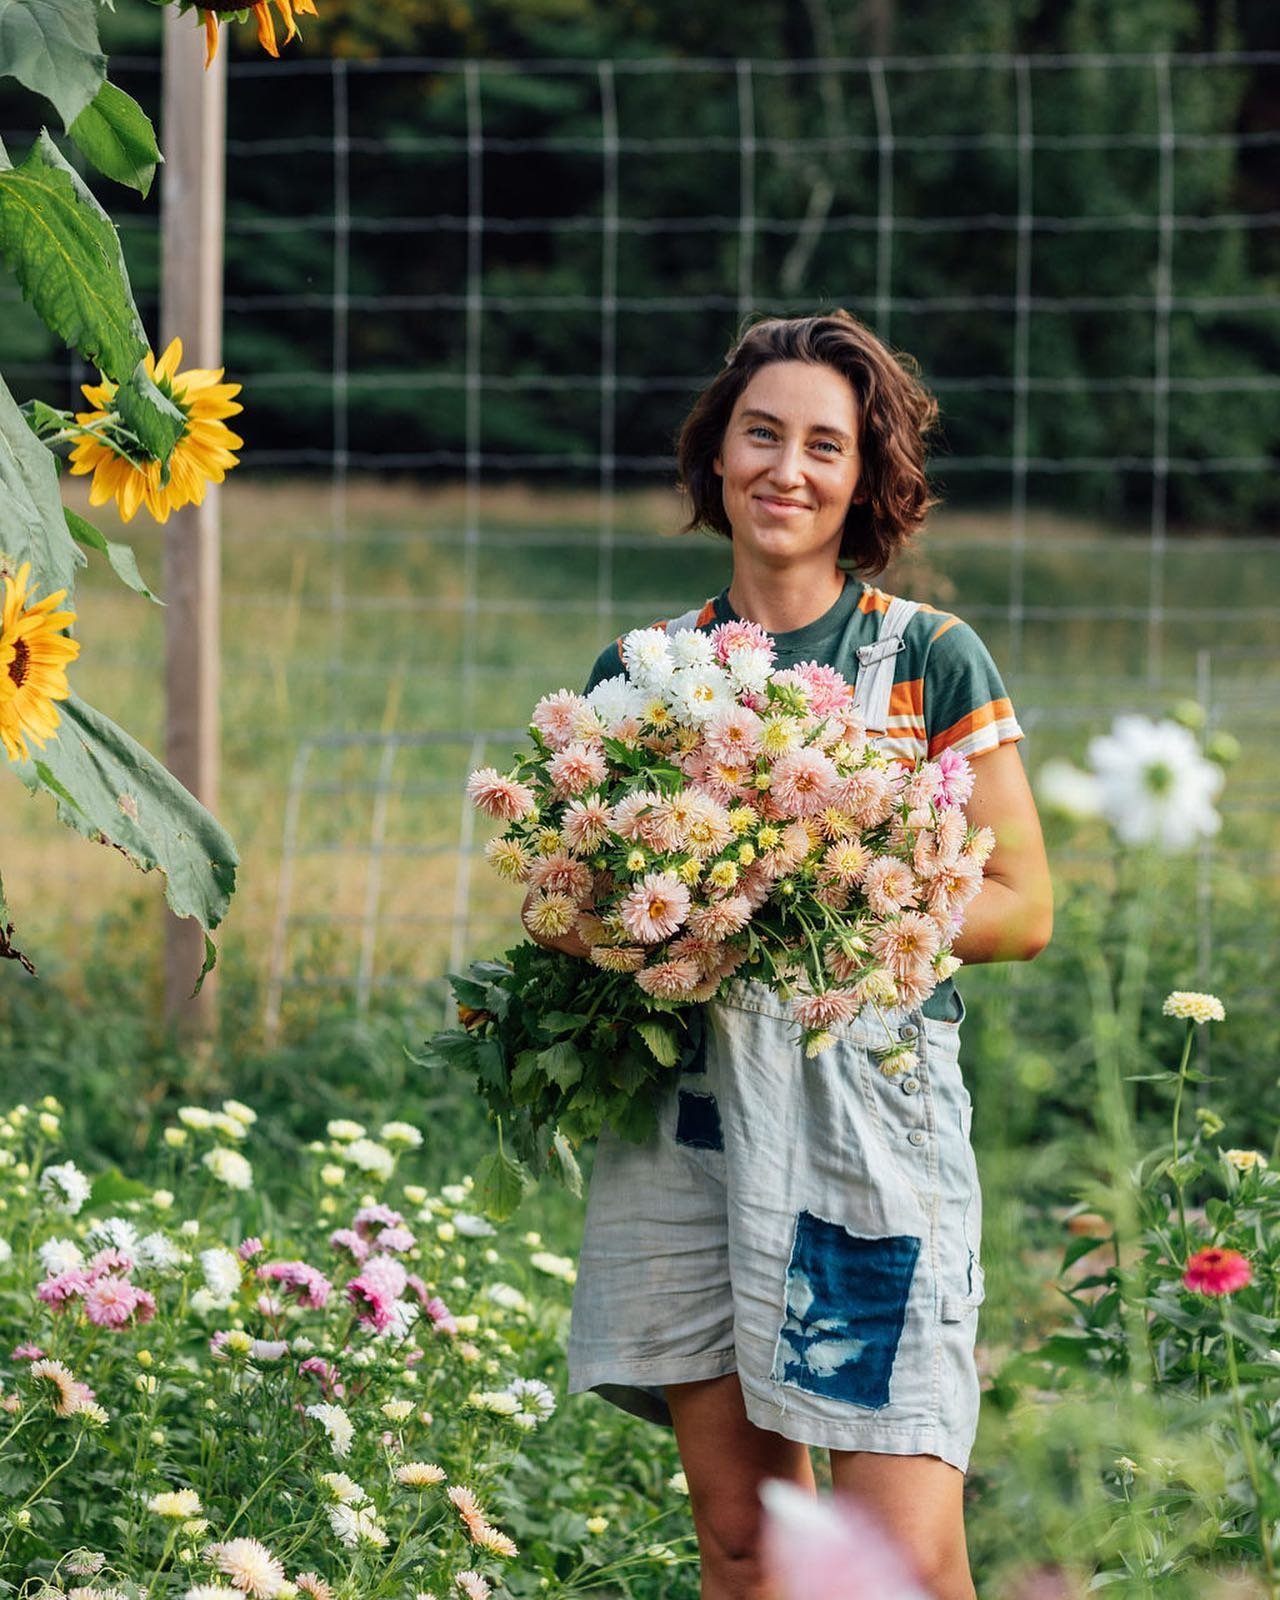 Do you love flowers? What about chatting with other people that love flowers? Little Pebble is HIRING! Looking for farmers market manager Saturday mornings in Rock Hill. DM or check out www.littlepebble.farm/jobs for more info 💐